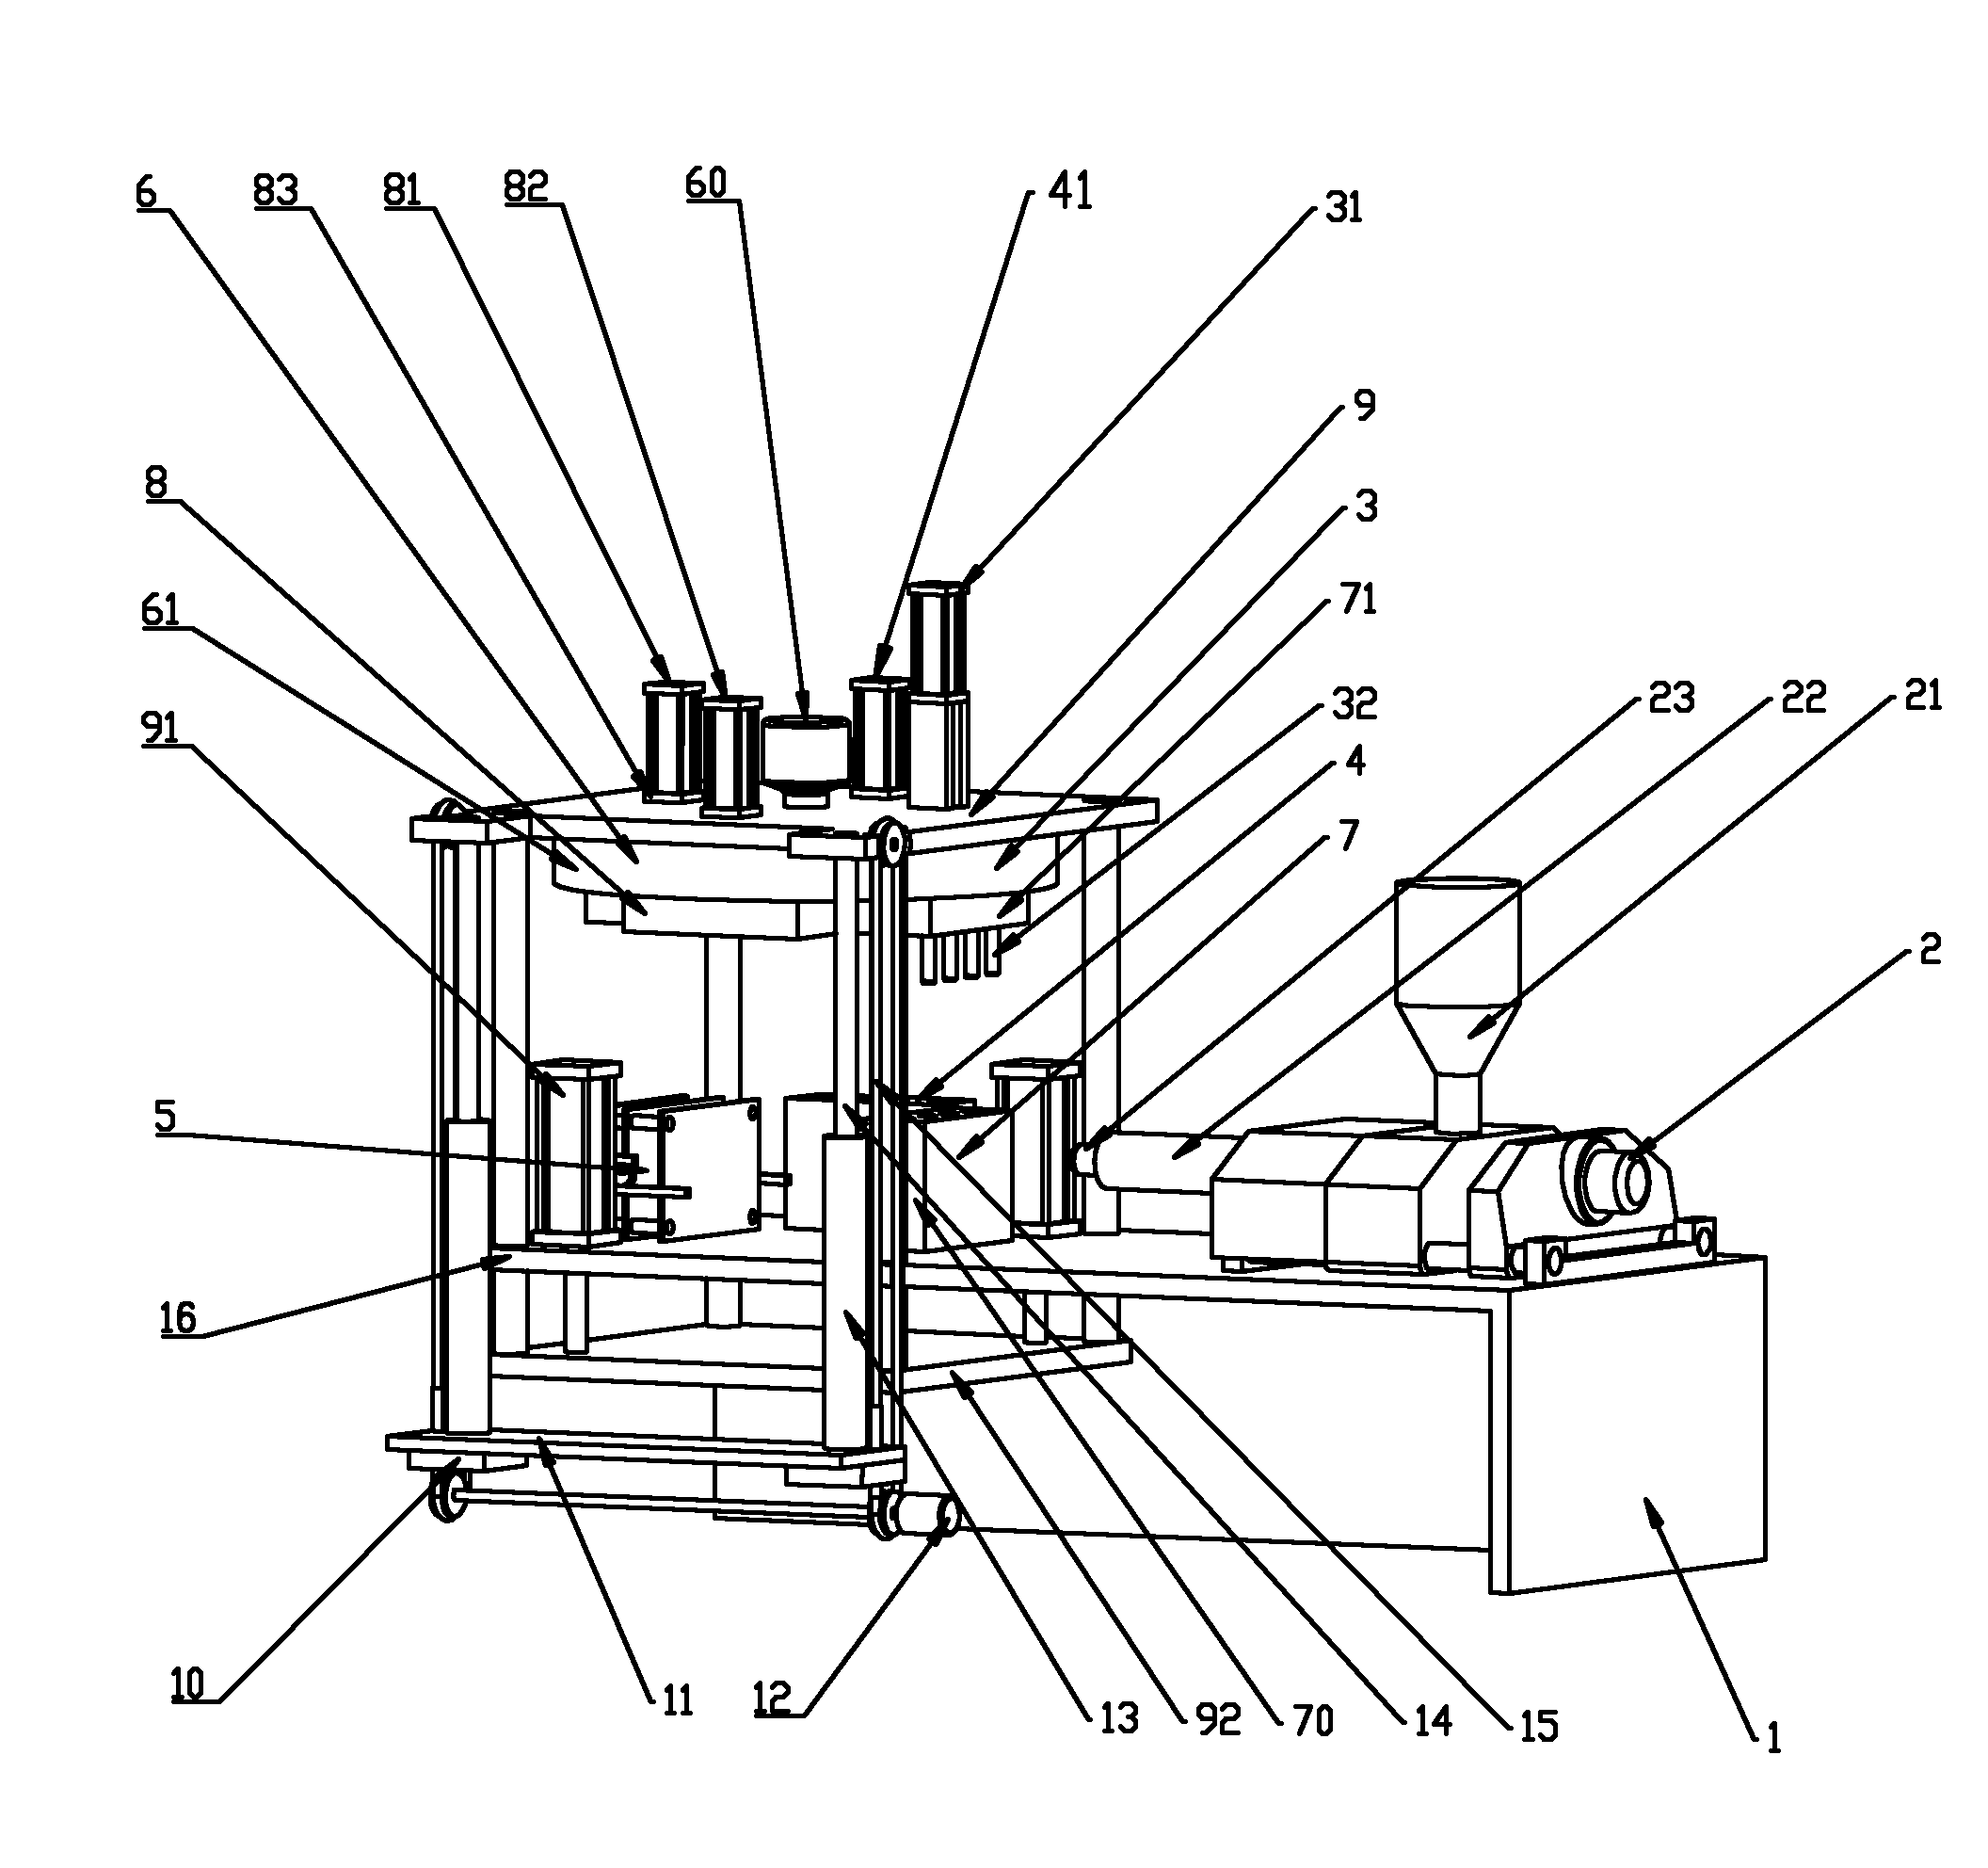 Hollow forming machine for one-step injection, drawing and blowing of plastic